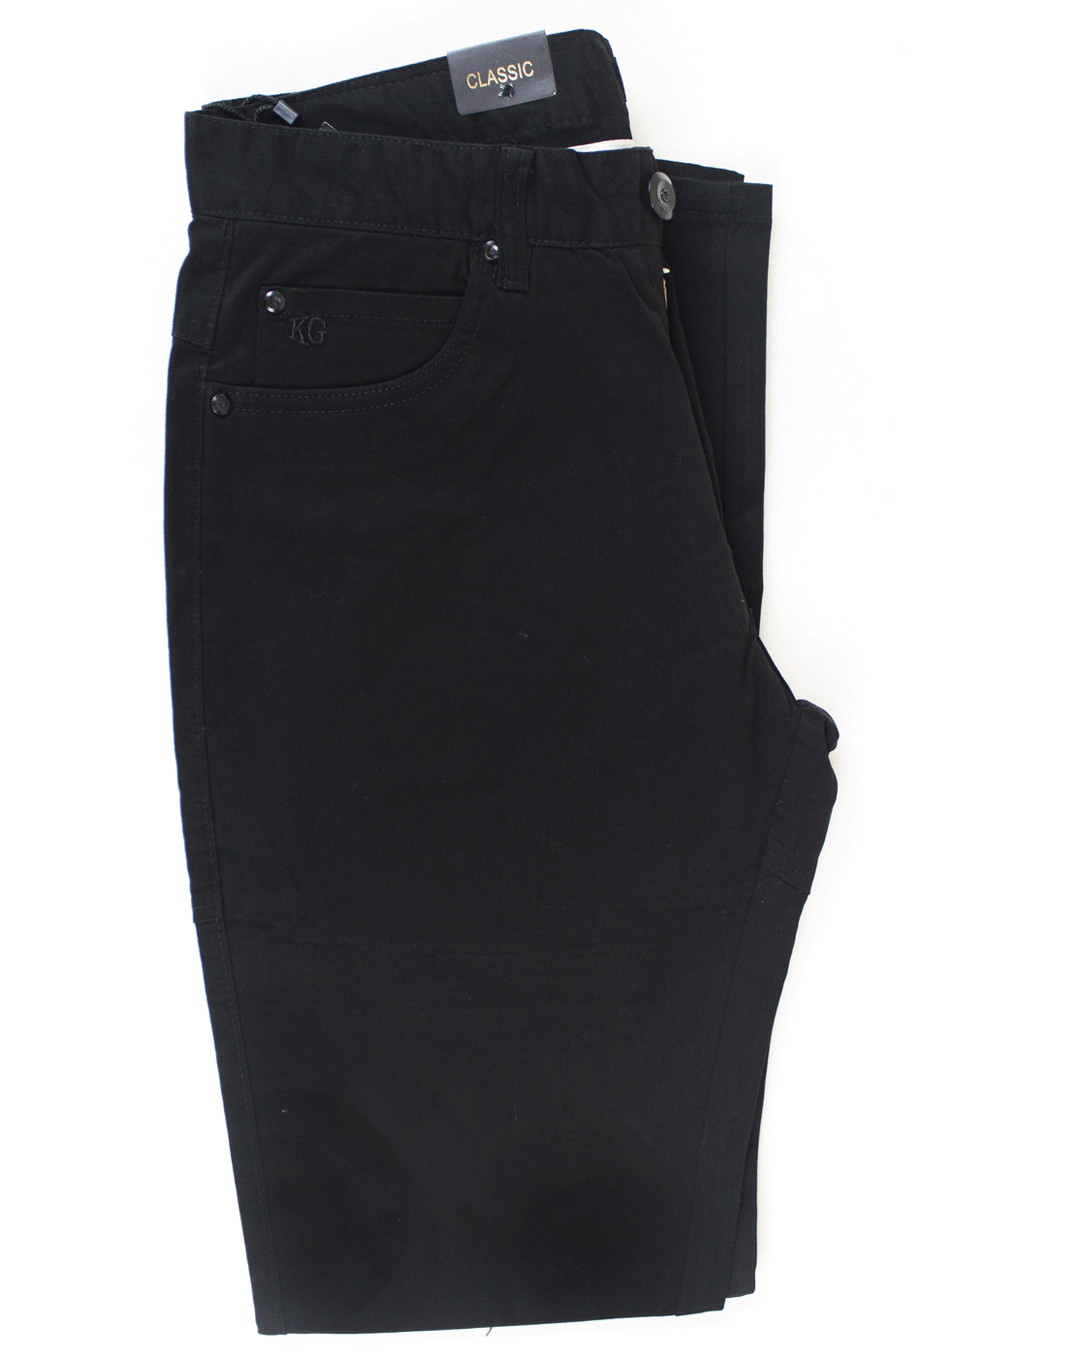 KG Classic Fit Black Chinos